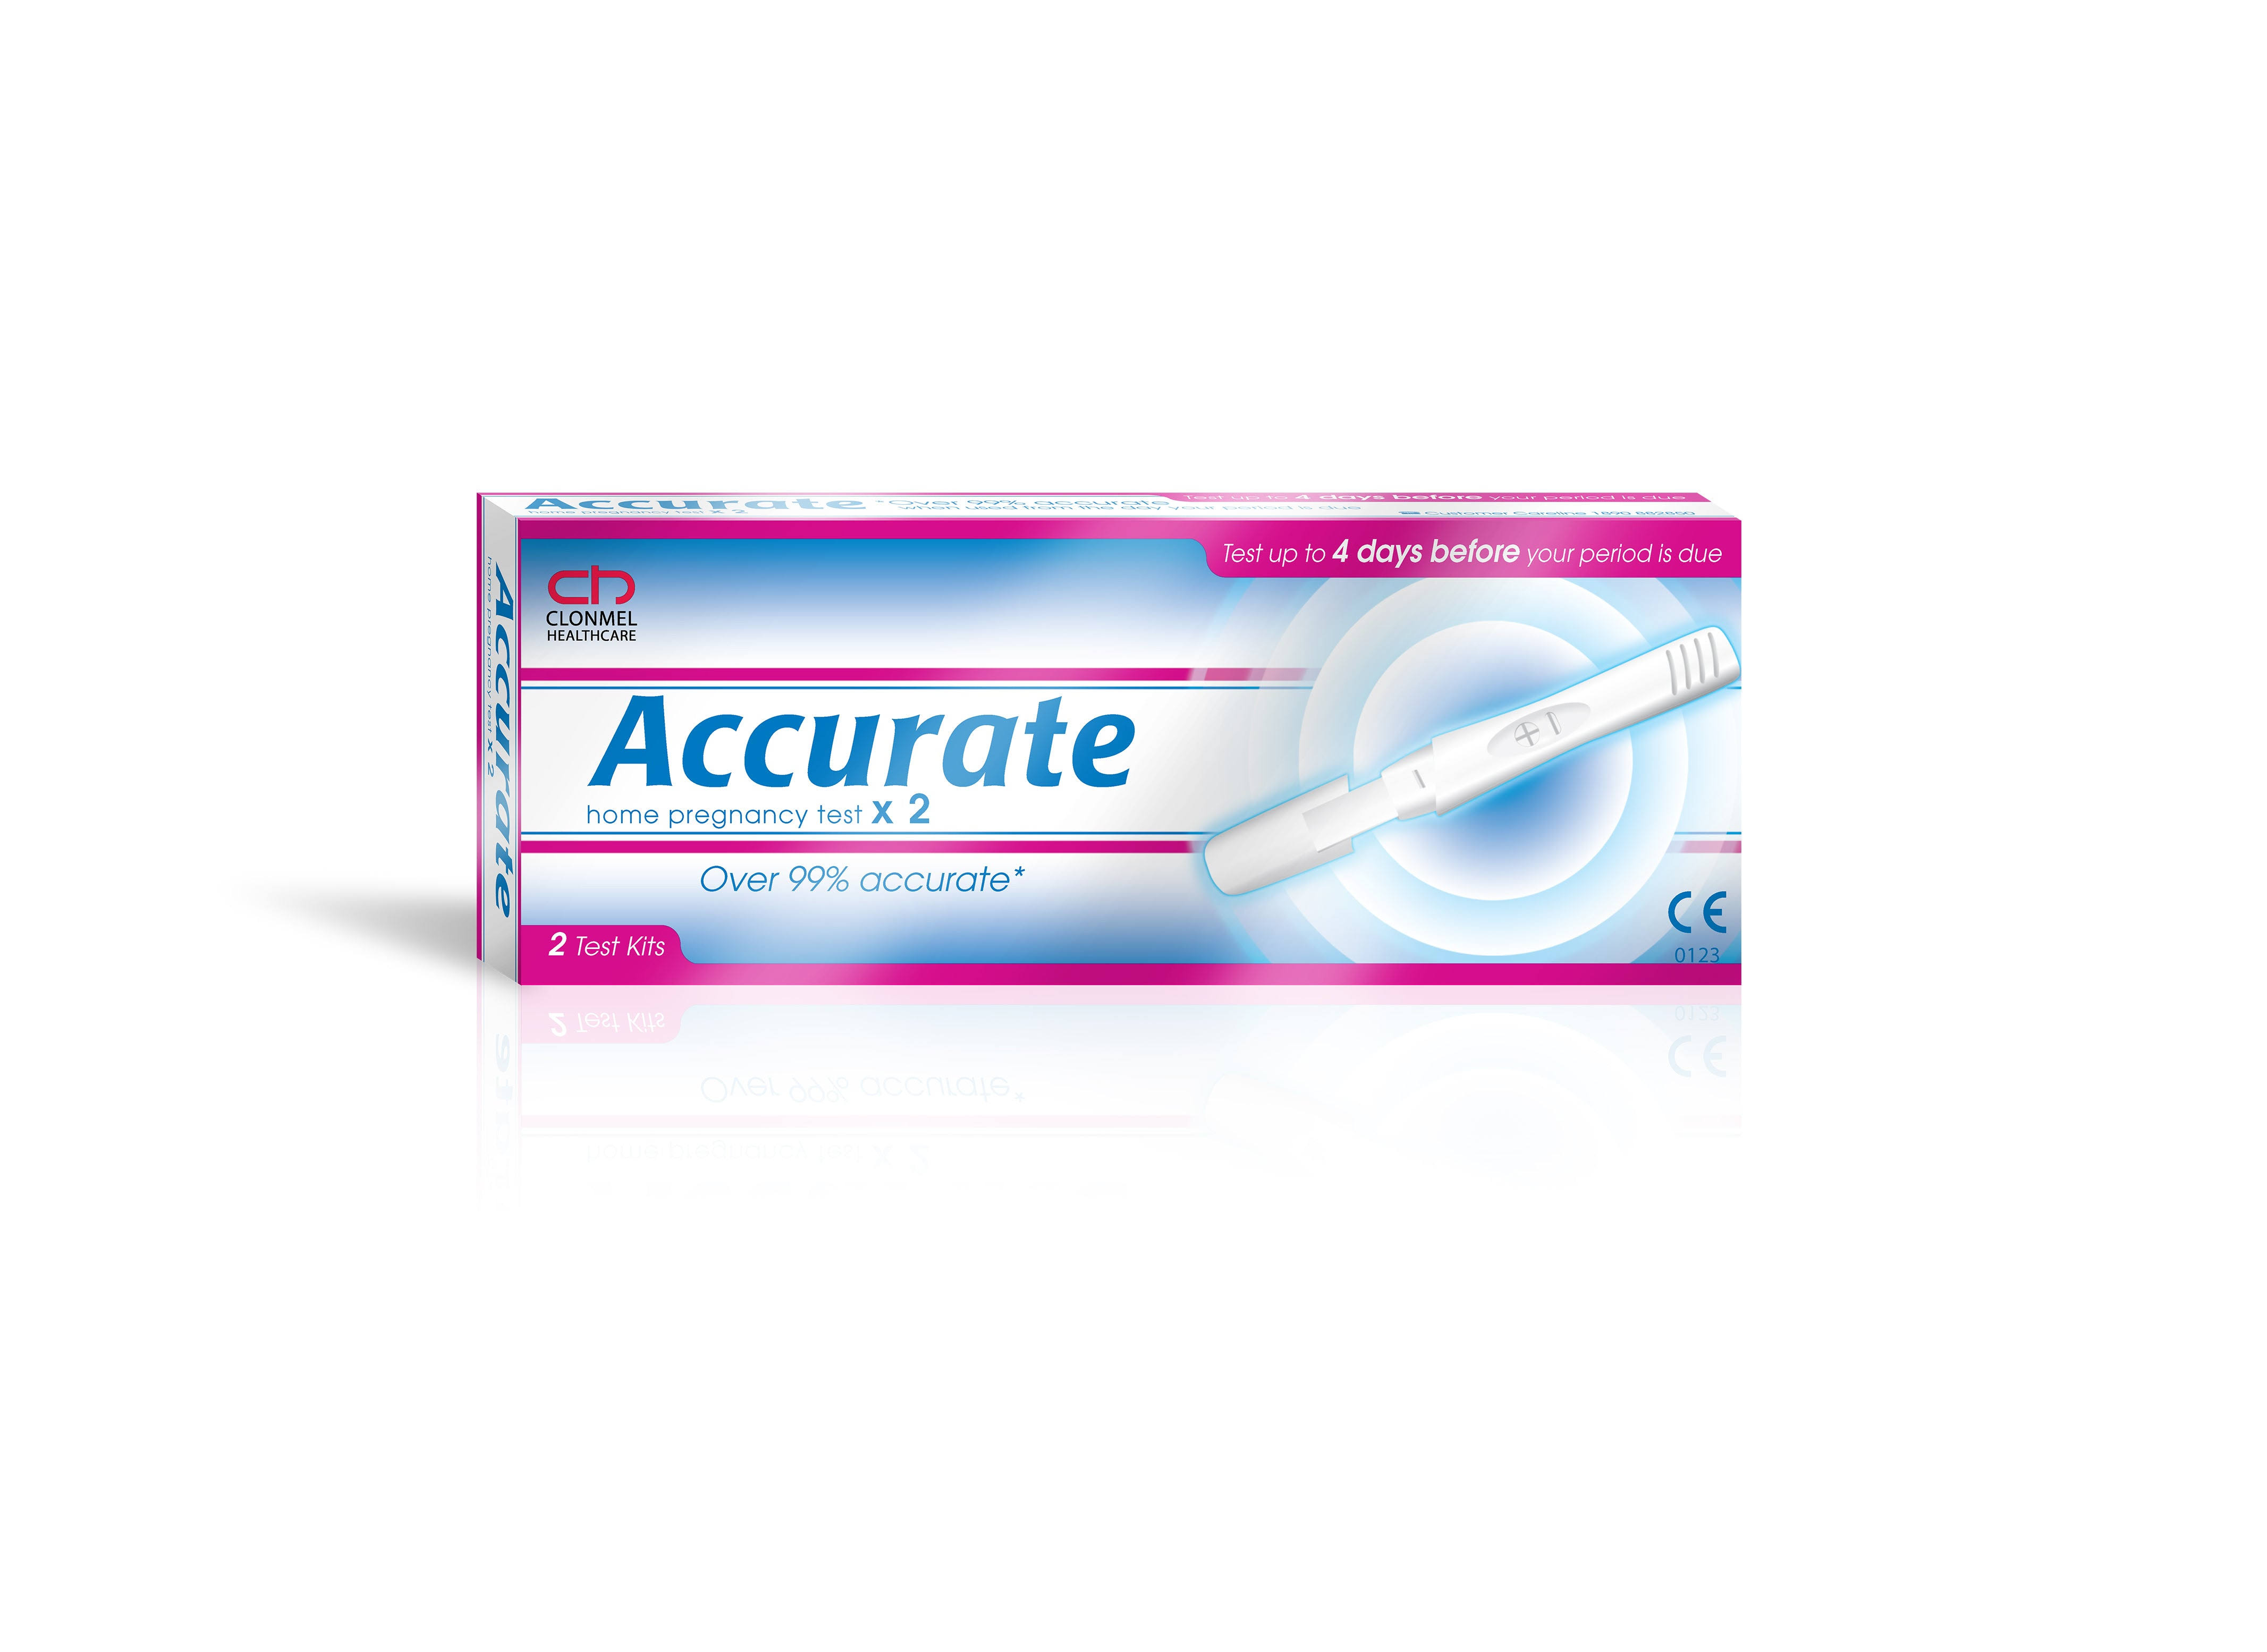 Clonmel Accurate Pregnancy Test Kit ~ Double